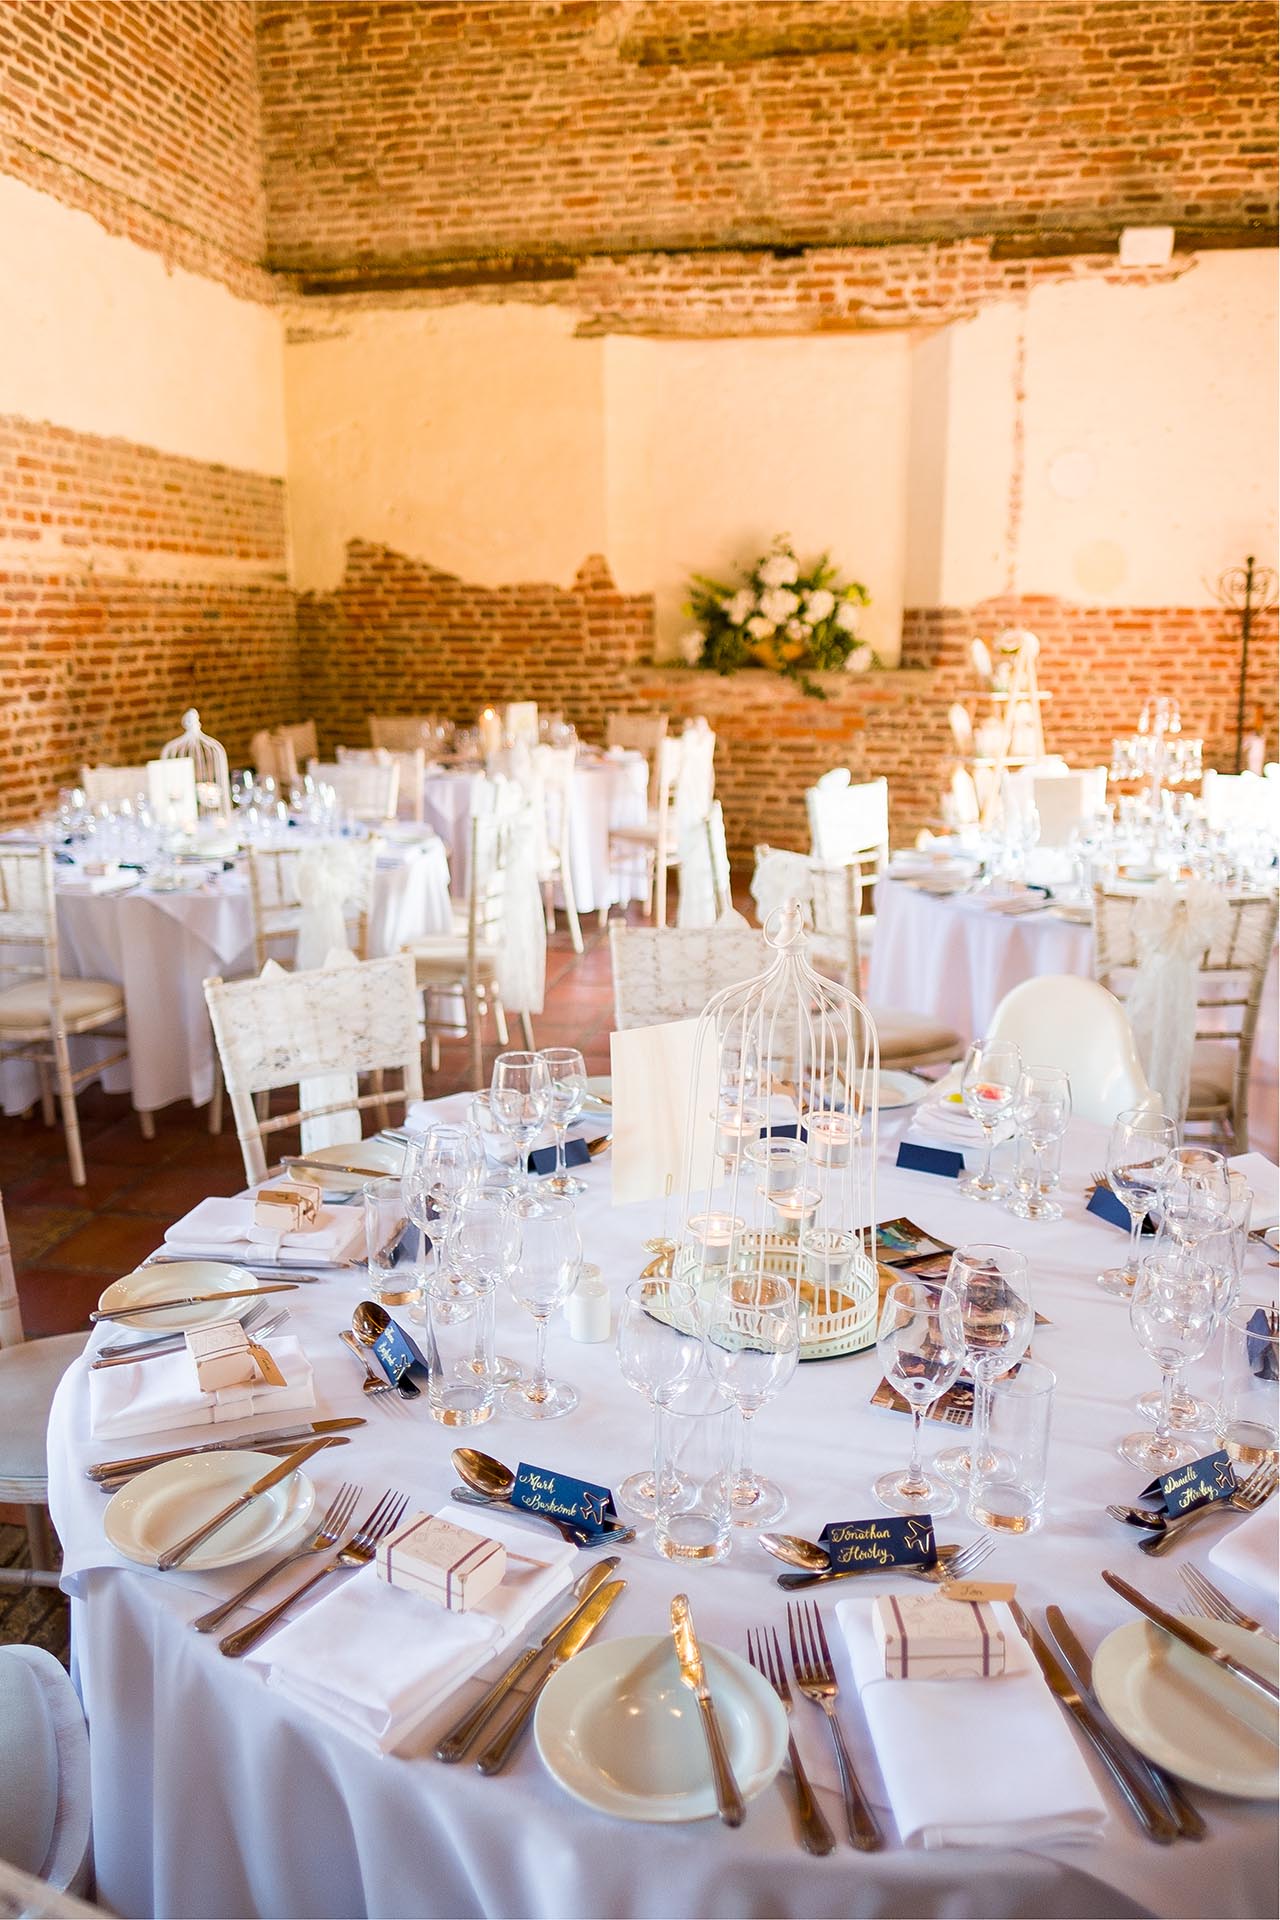 The Coach House dressed for a wedding breakfast at Leez Priory, Great Leighs, Chelmsford, by Essex wedding photographer